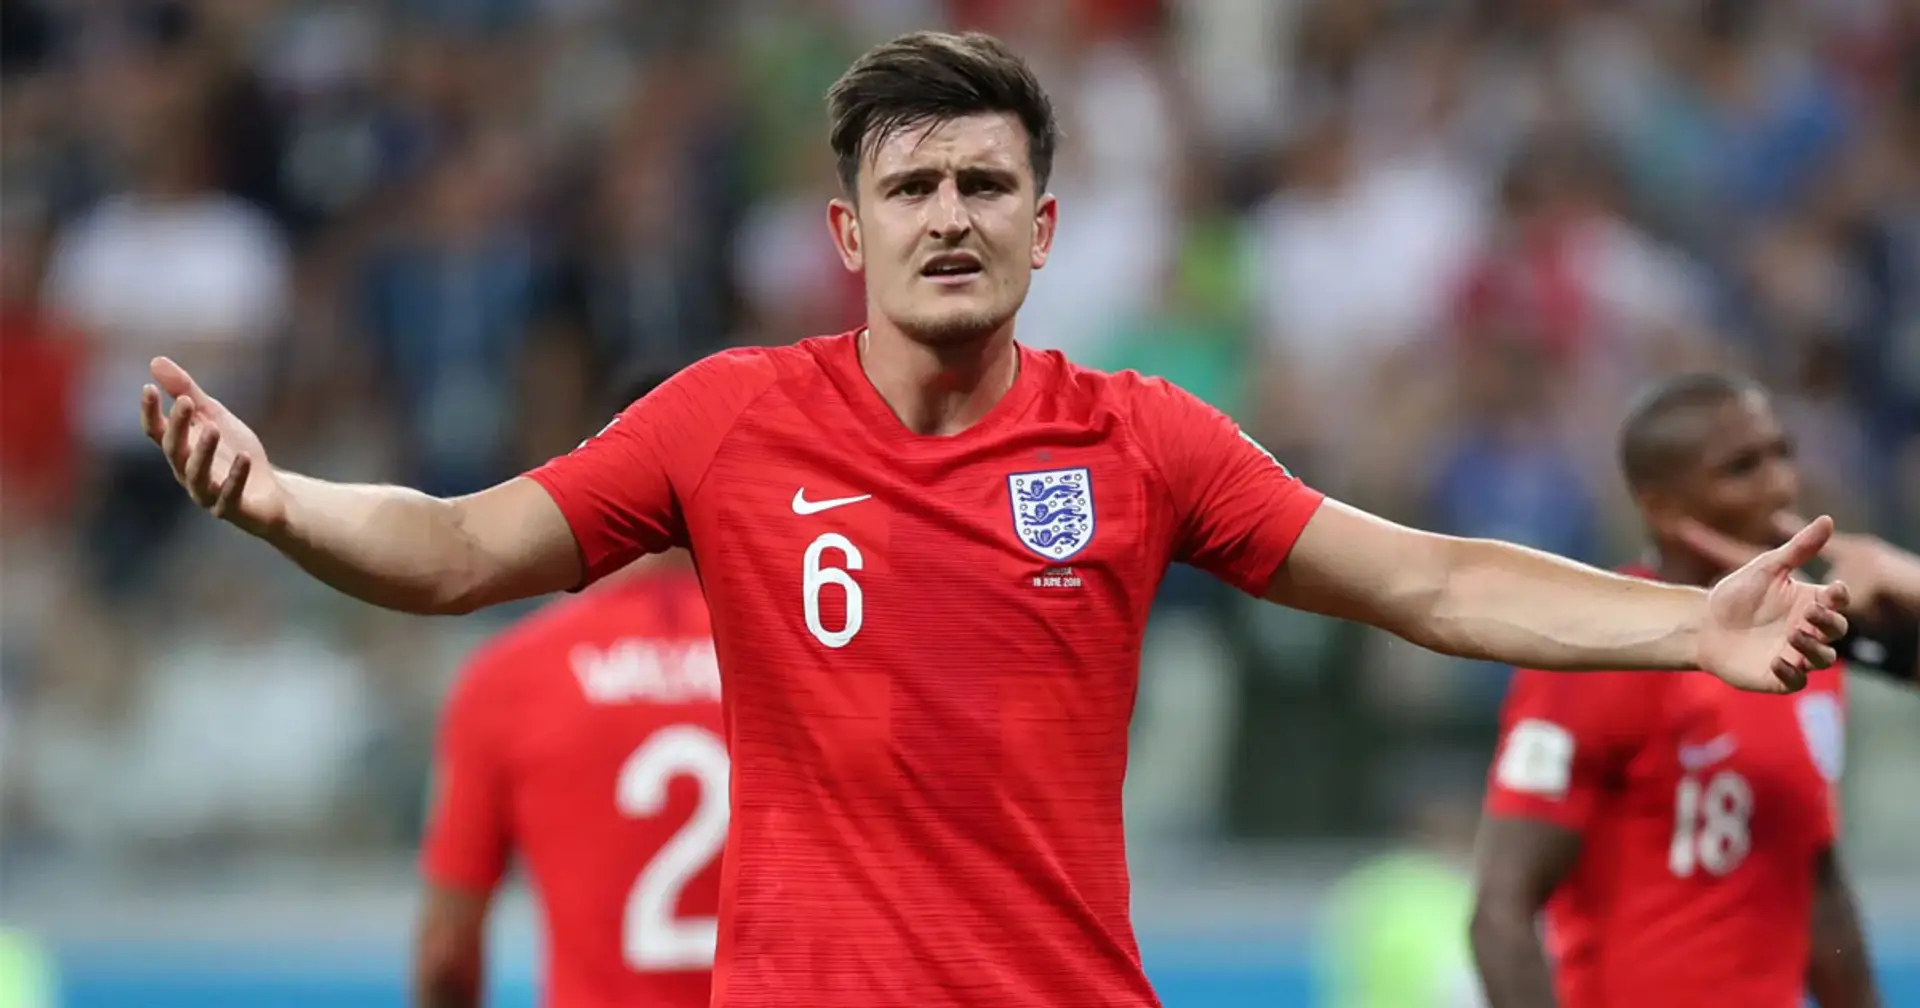 Maguire withdrawn from England squad by Southgate after trial verdict